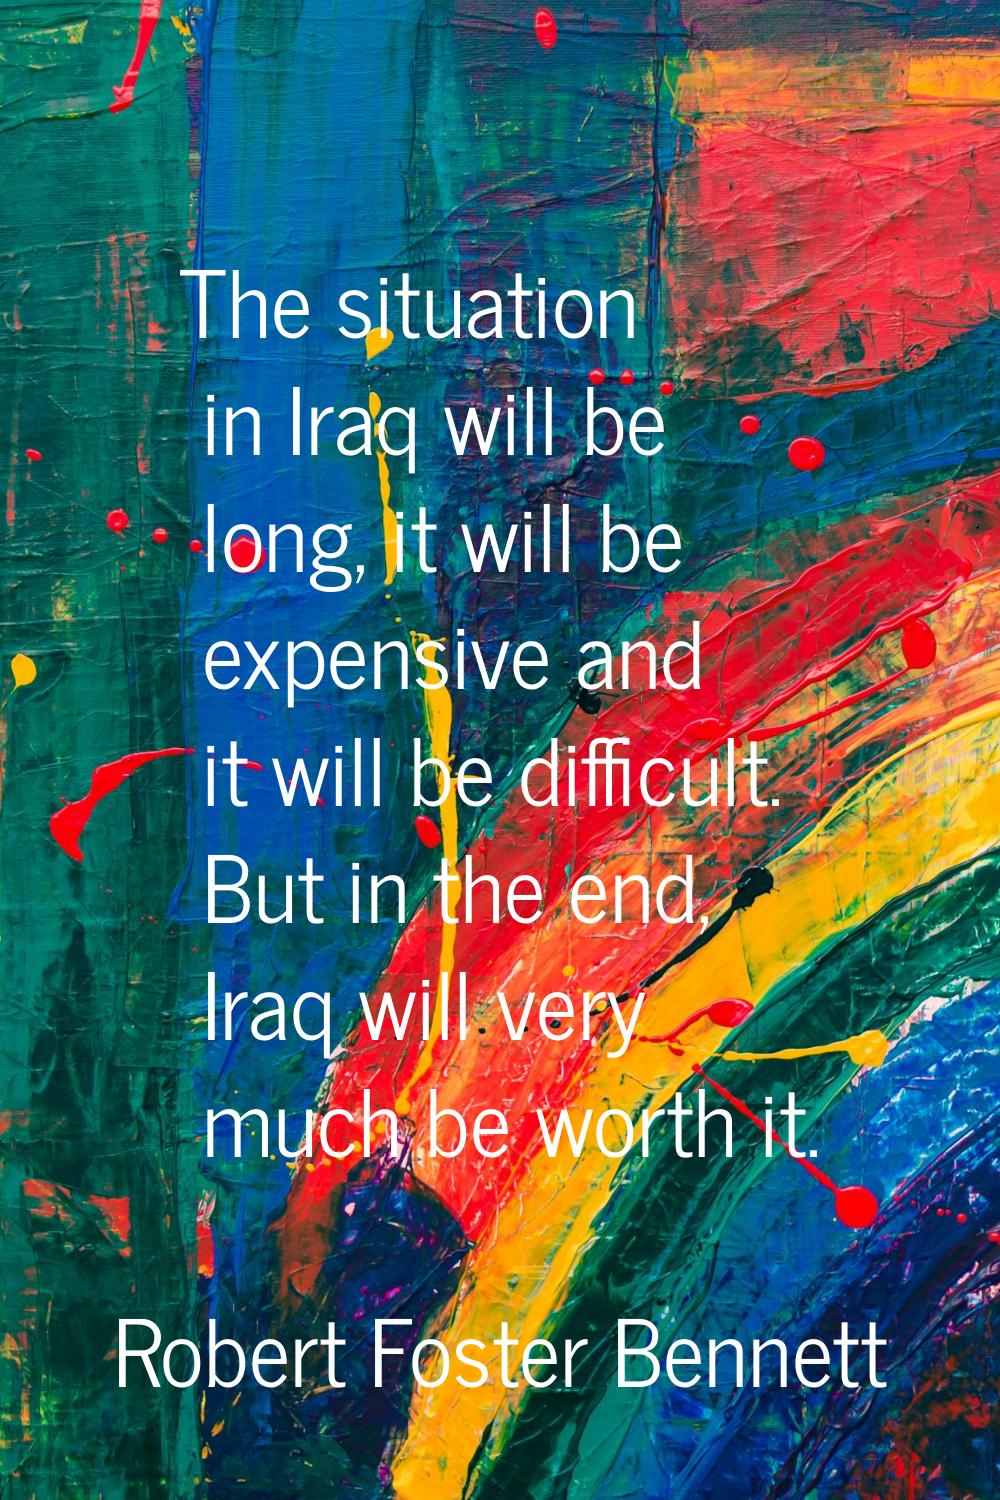 The situation in Iraq will be long, it will be expensive and it will be difficult. But in the end, 